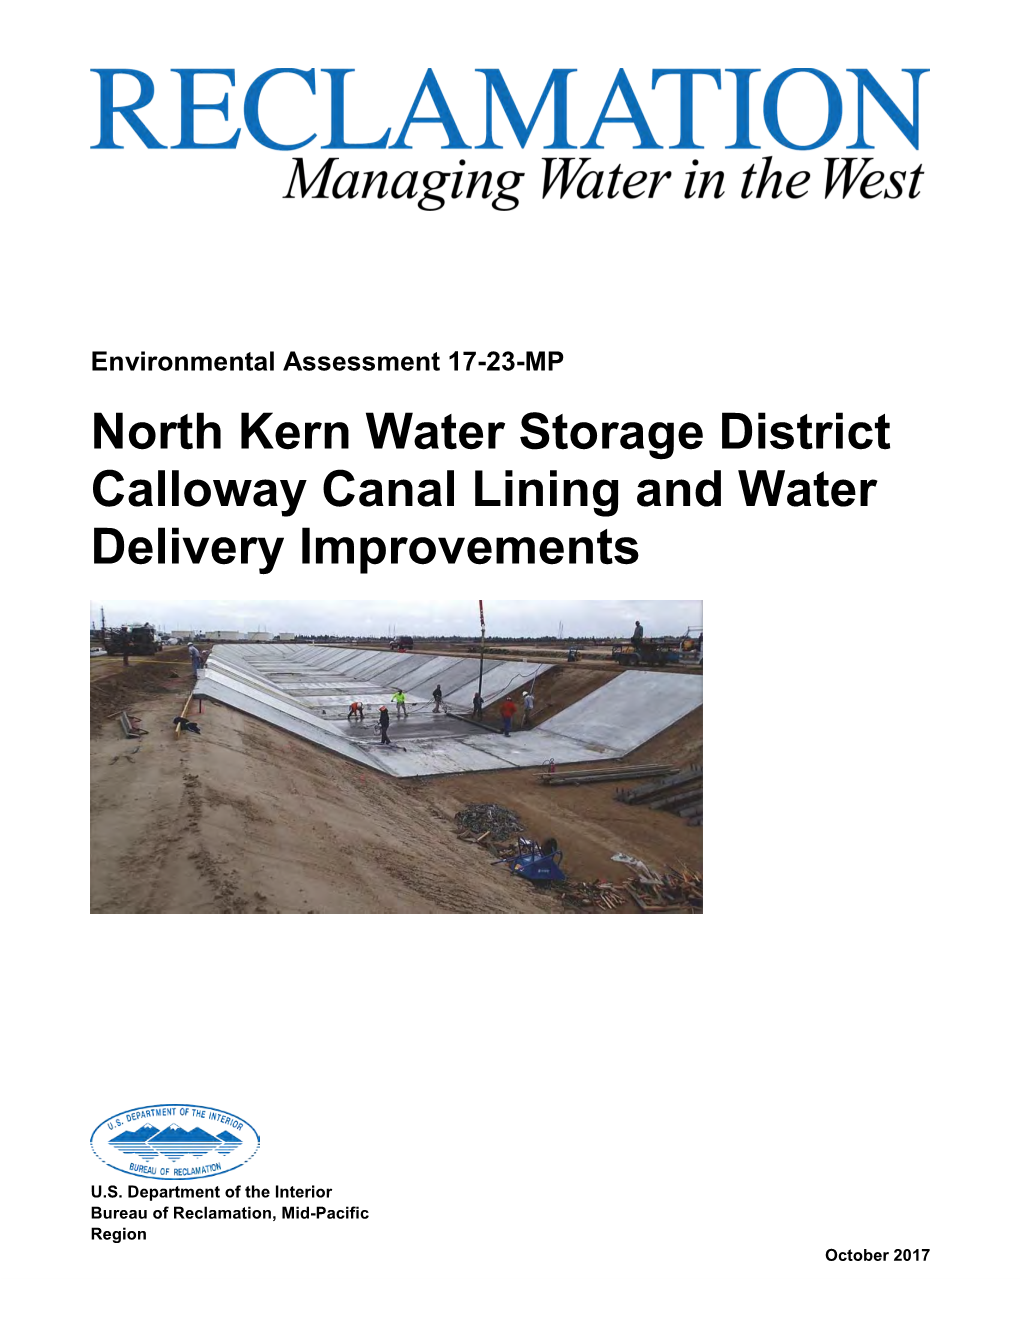 North Kern Water Storage District Callowa Canal Lining and Water